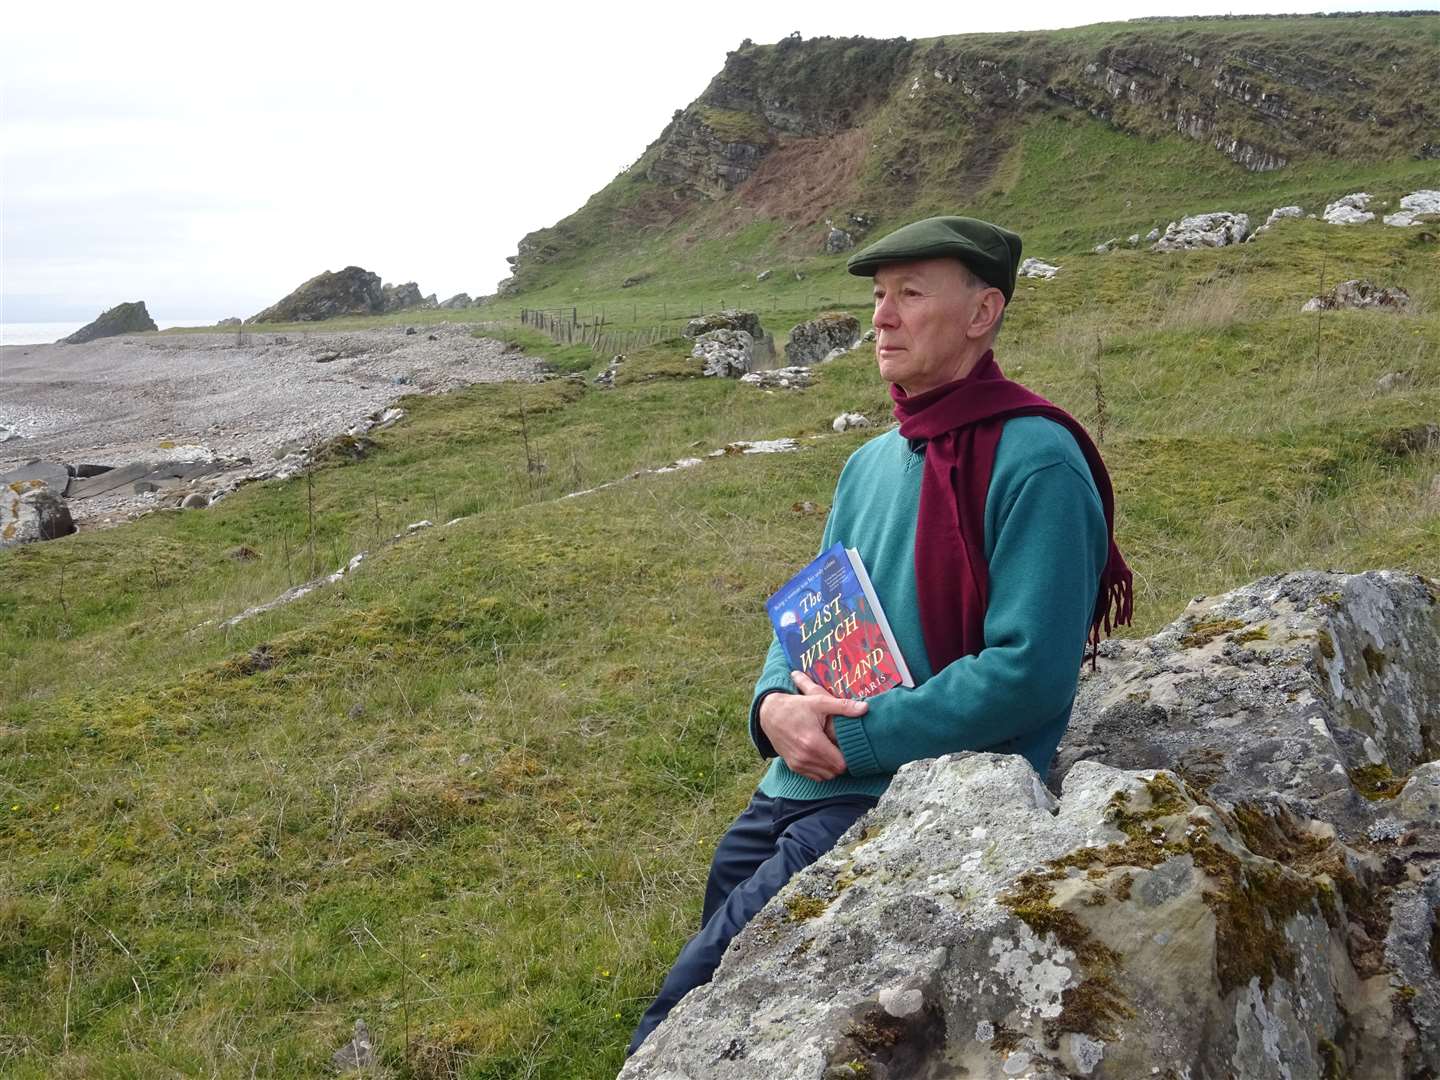 Writer Philip on the shore along from Hilton, not far from Tain.